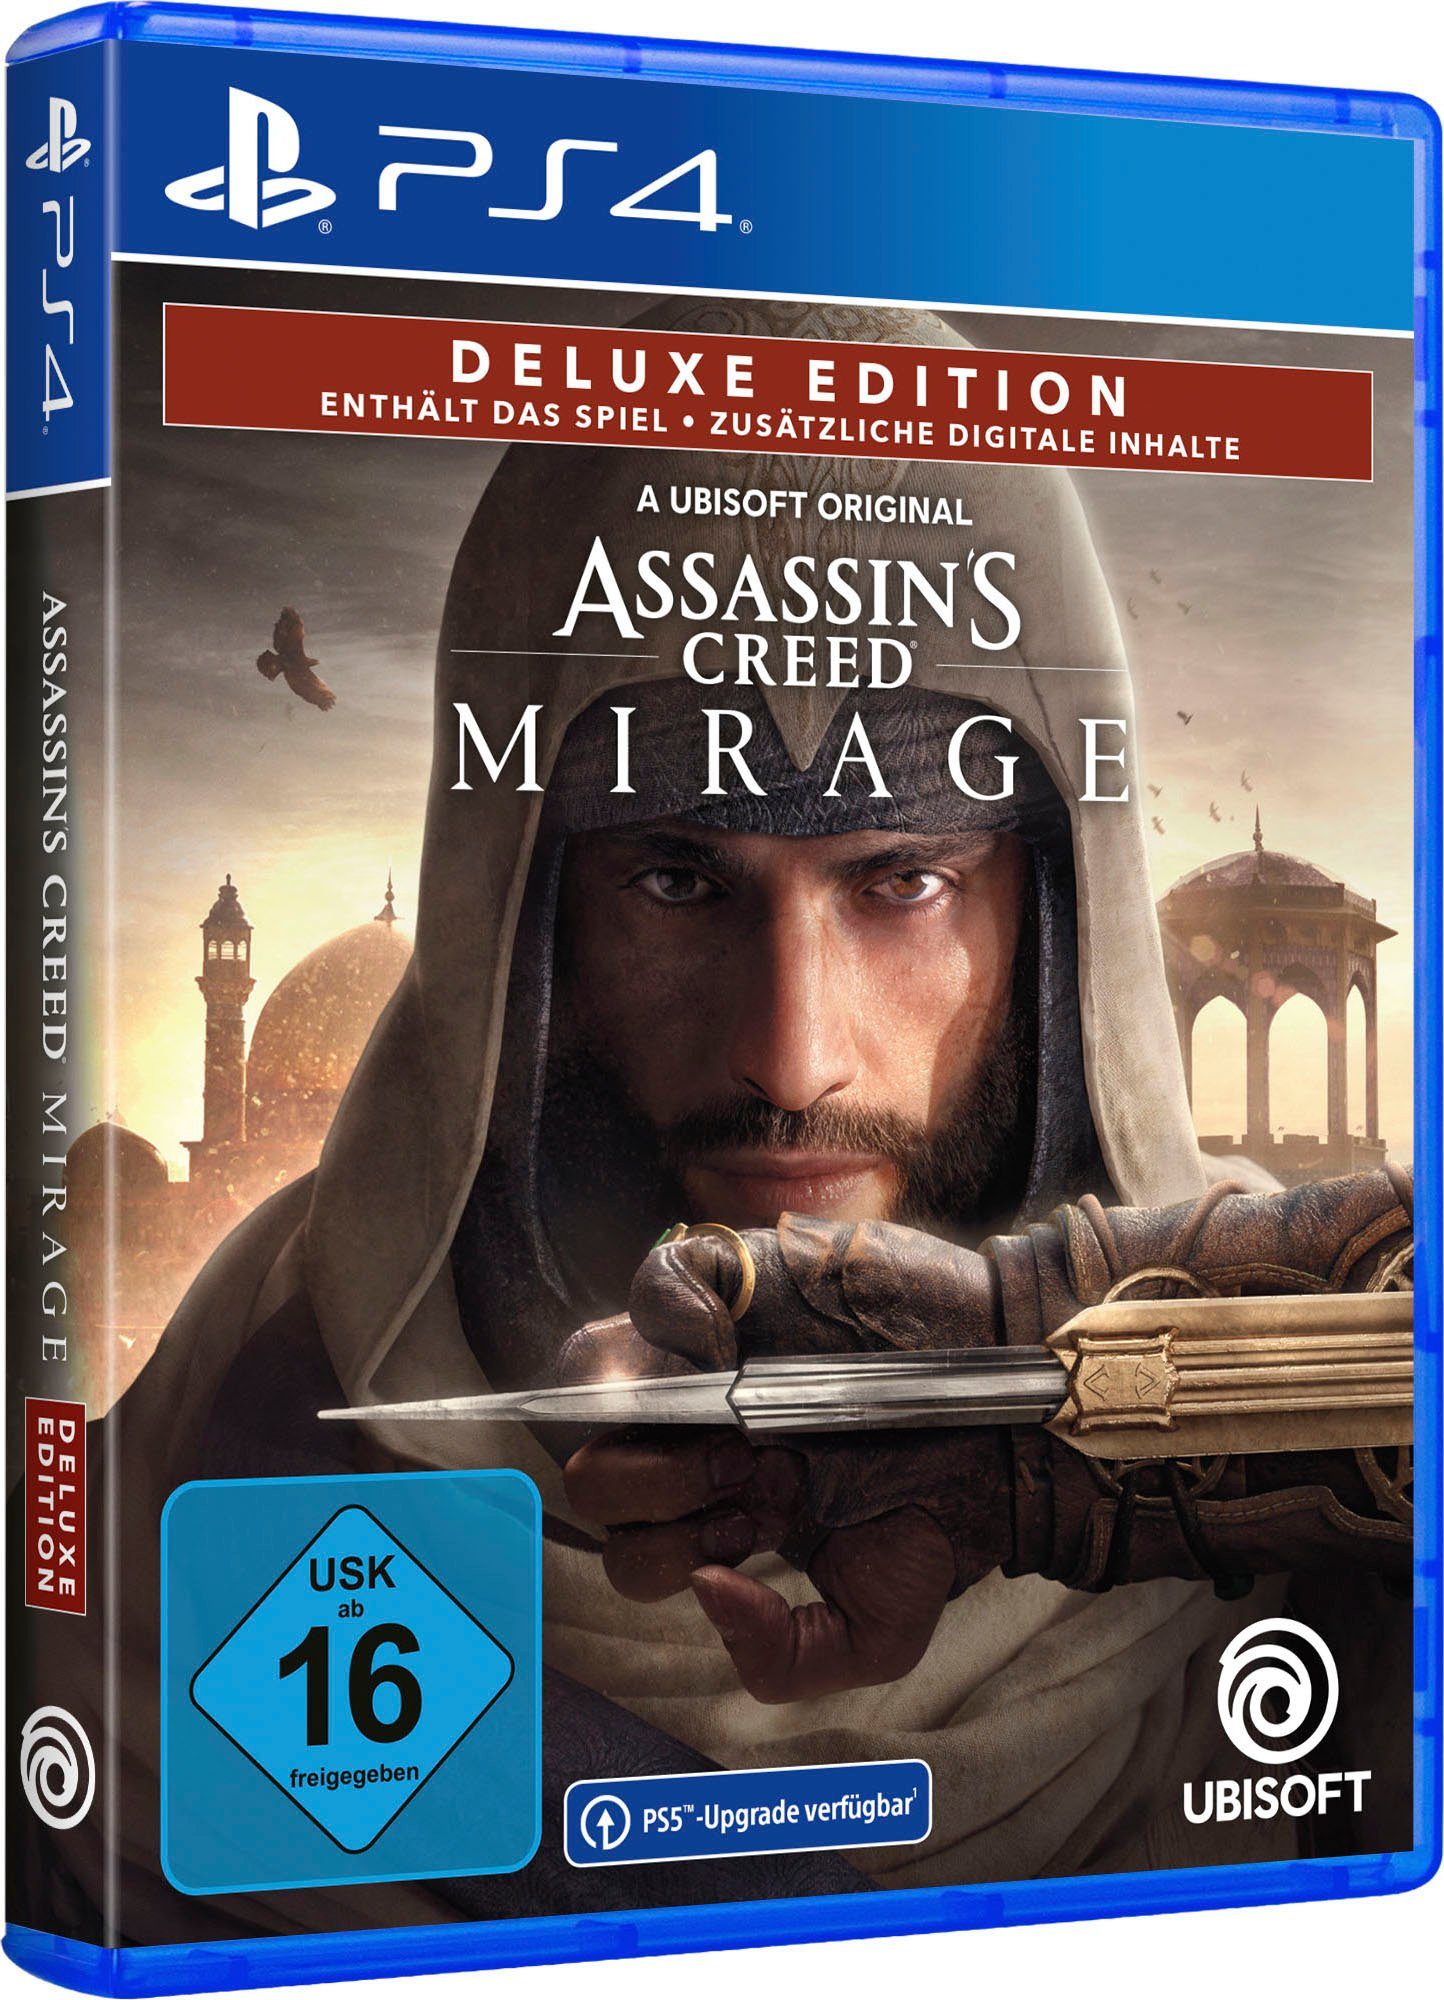 Creed PlayStation PS5) auf - Edition UBISOFT Mirage Upgrade 4 Deluxe (kostenloses Assassin's